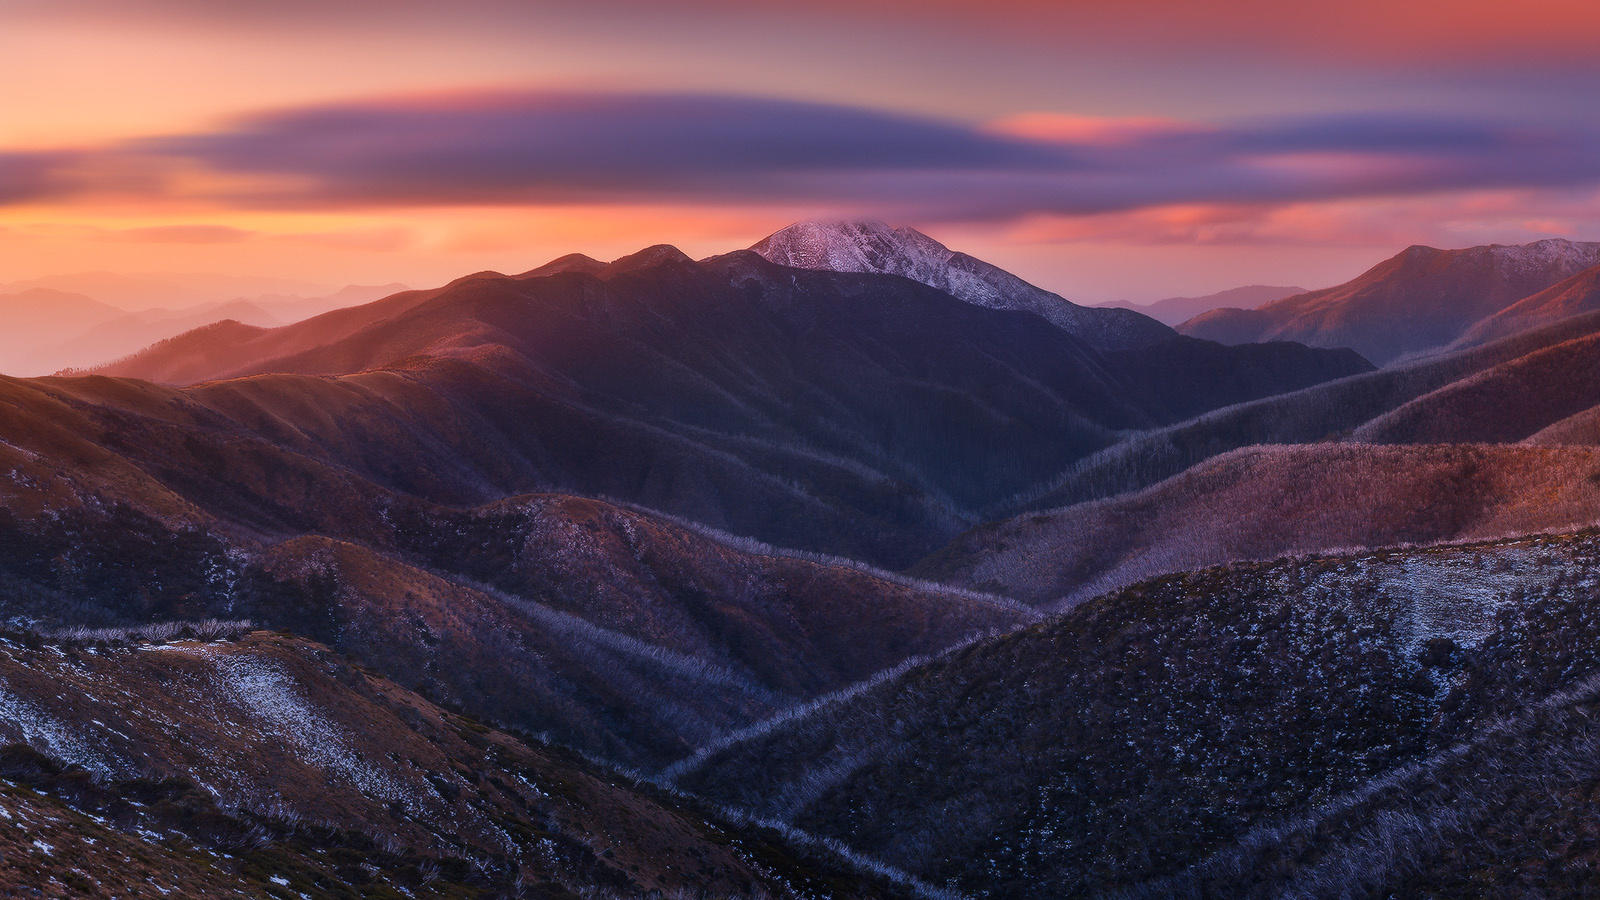 Warming the Feathertop